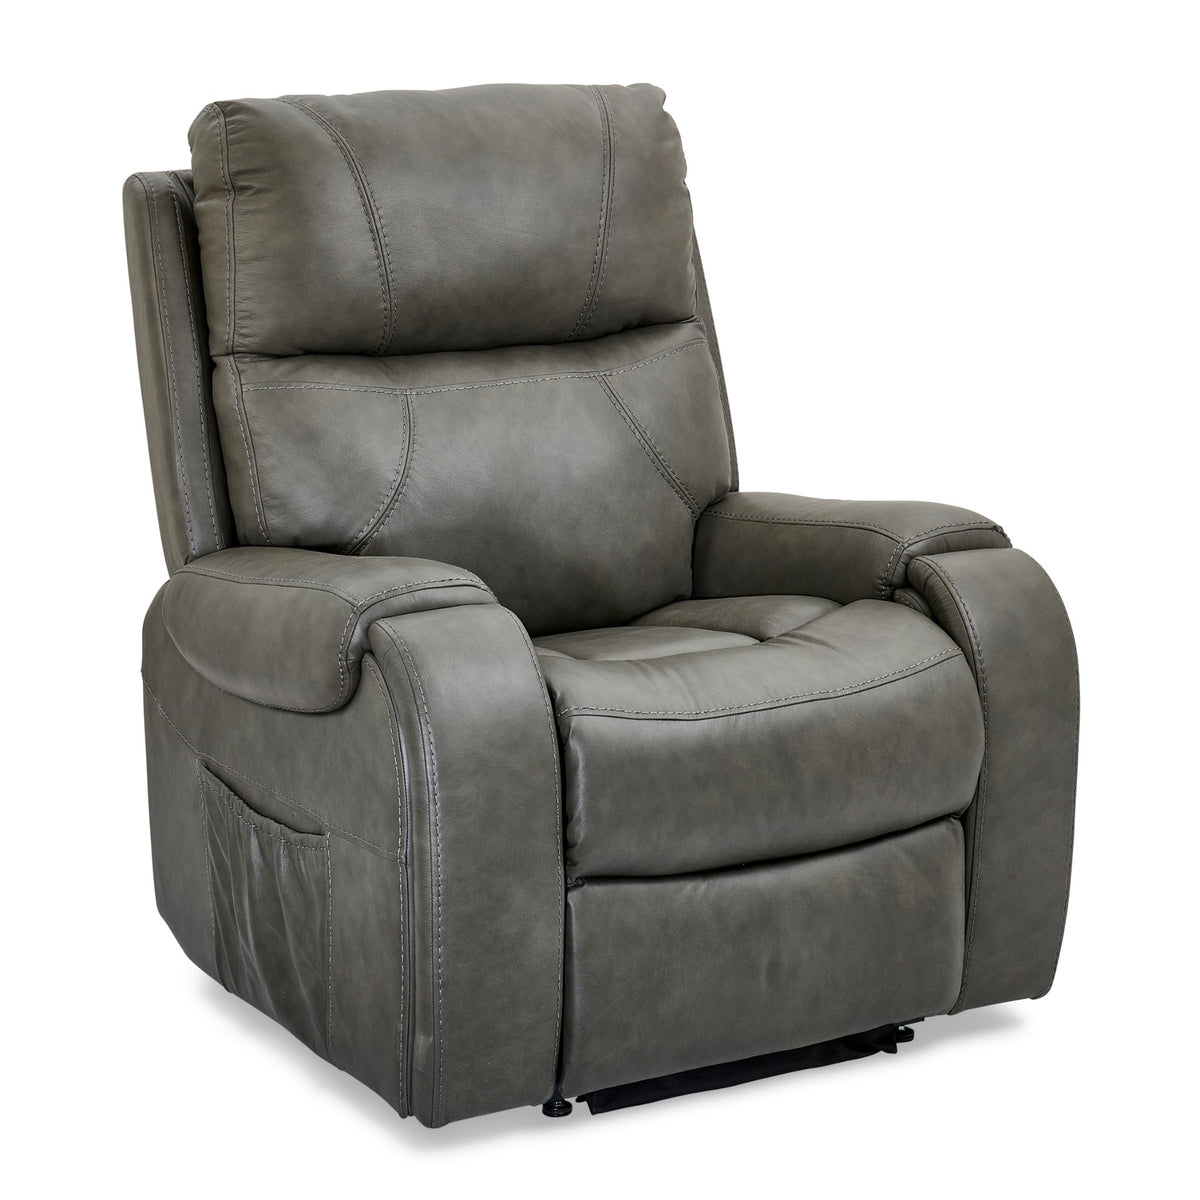 UltraComfort UC671 UltraCozy Power Recliner Chair